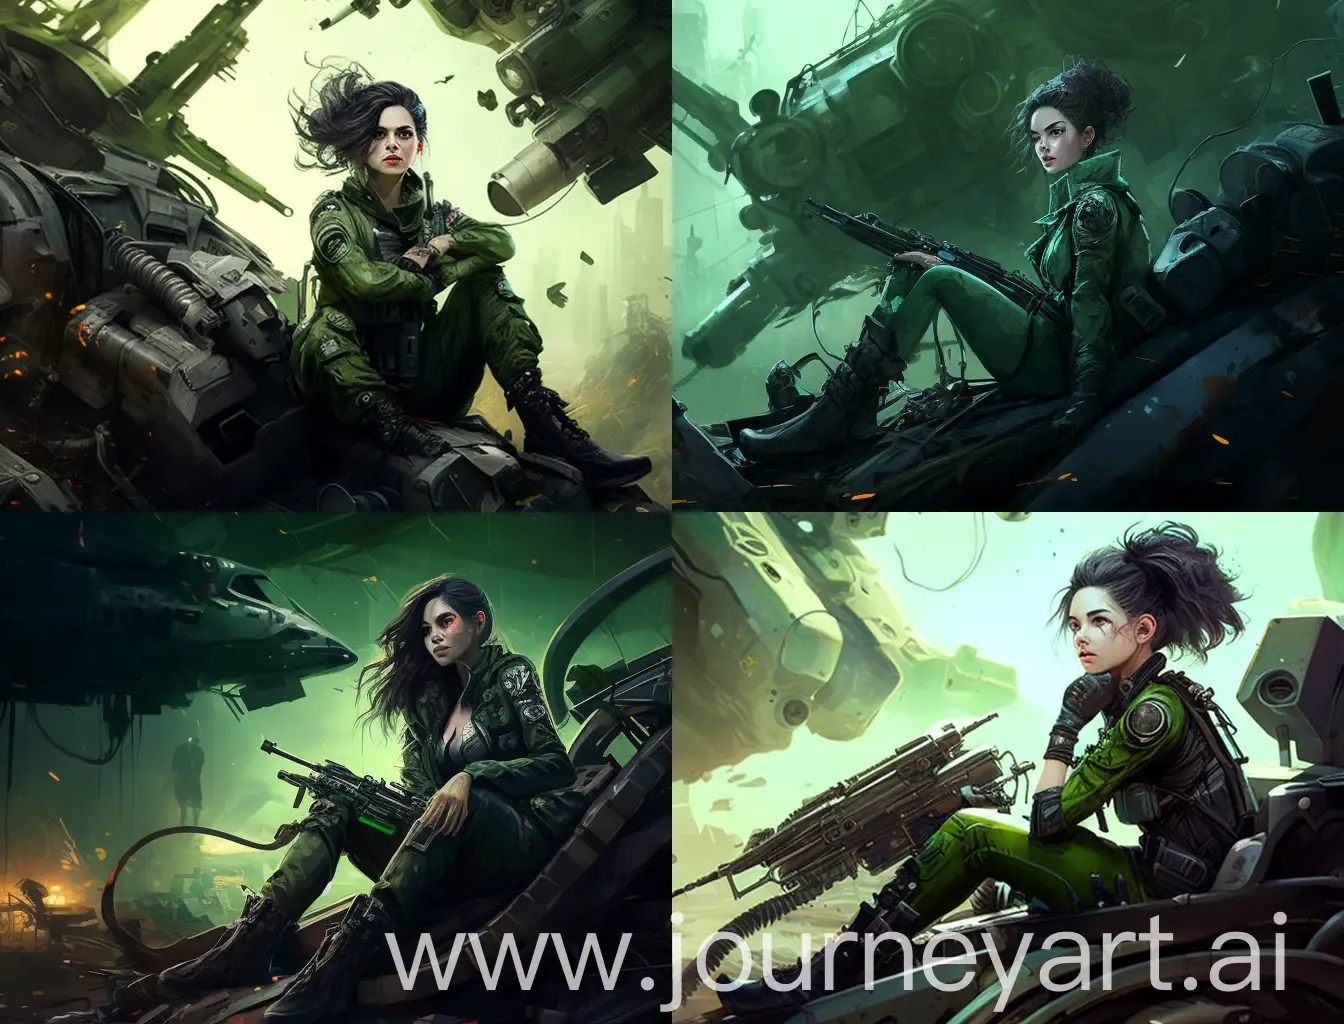 Military-Girl-Cleaning-Sniper-Rifle-on-Fantastical-Tank-Amidst-Destroyed-Enemy